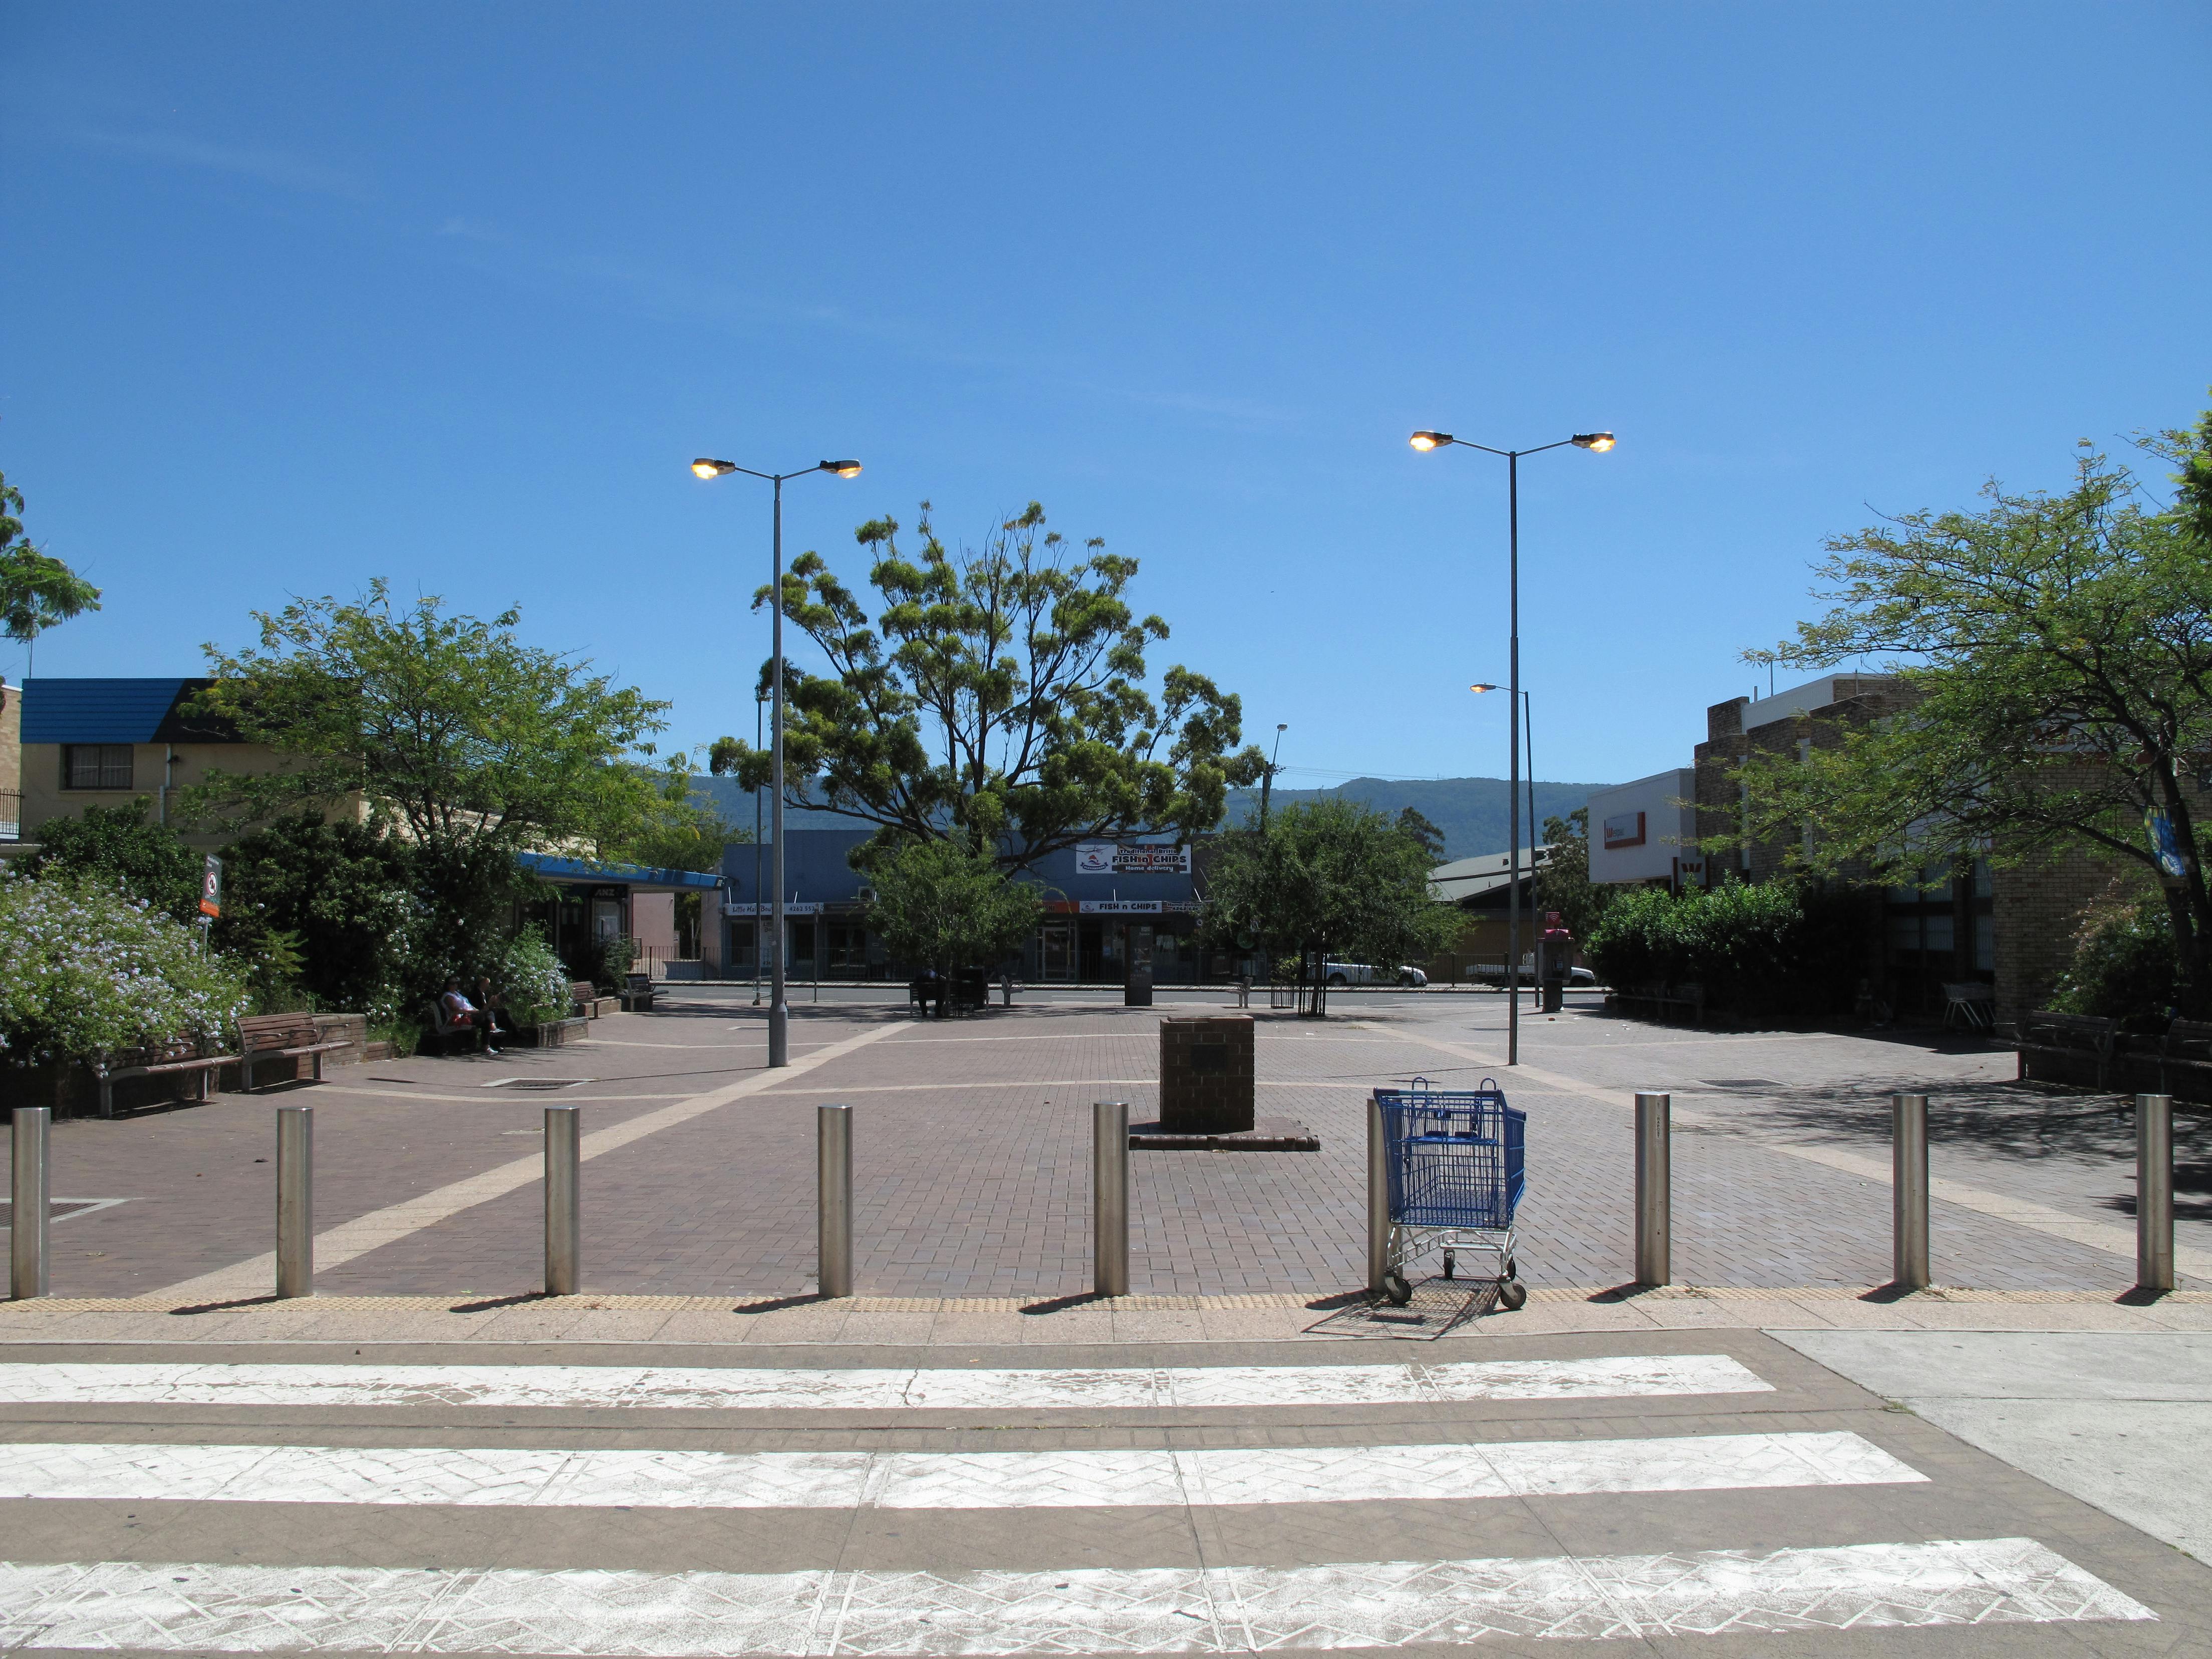 Dapto Square looking west